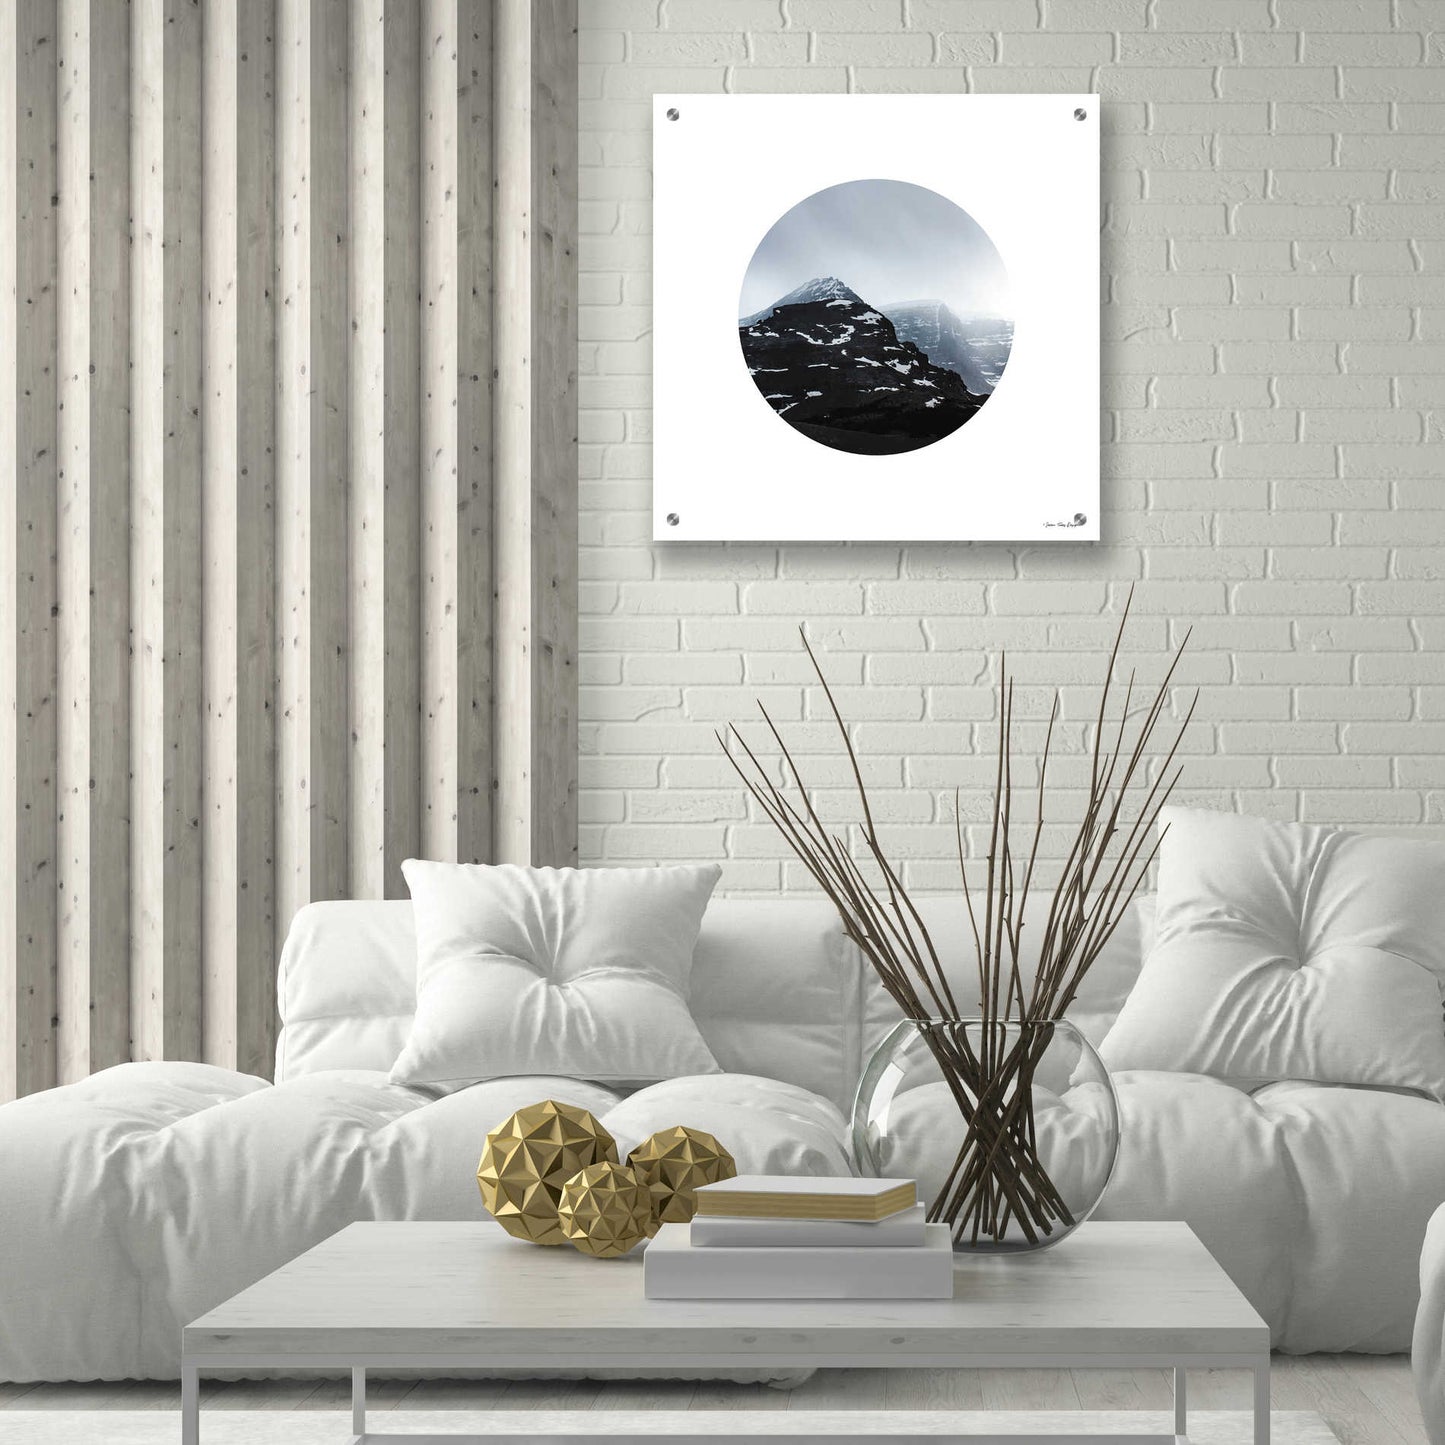 Epic Art 'Snow Mountains' by Seven Trees Design, Acrylic Glass Wall Art,24x24